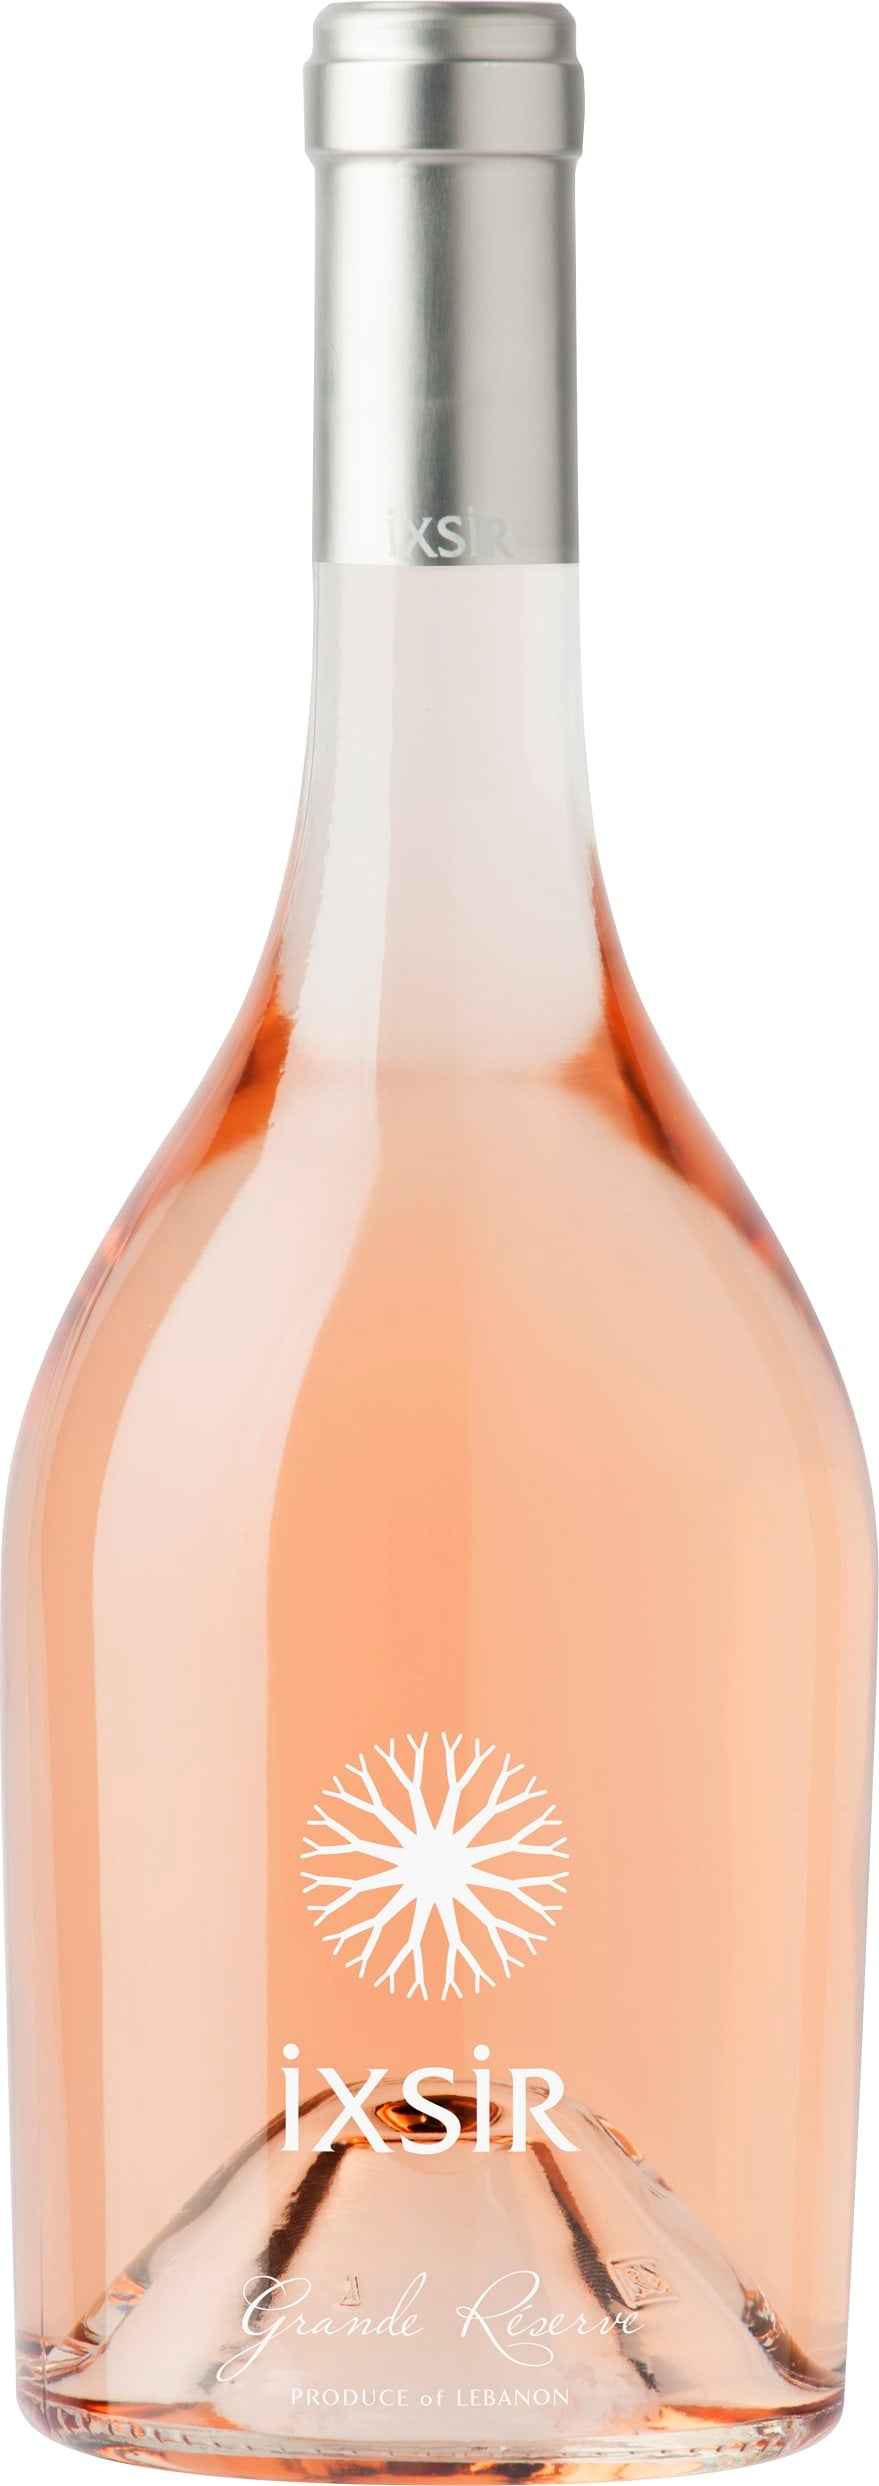 Ixsir Grande Reserve Rose 2022 75cl - Buy Ixsir Wines from GREAT WINES DIRECT wine shop